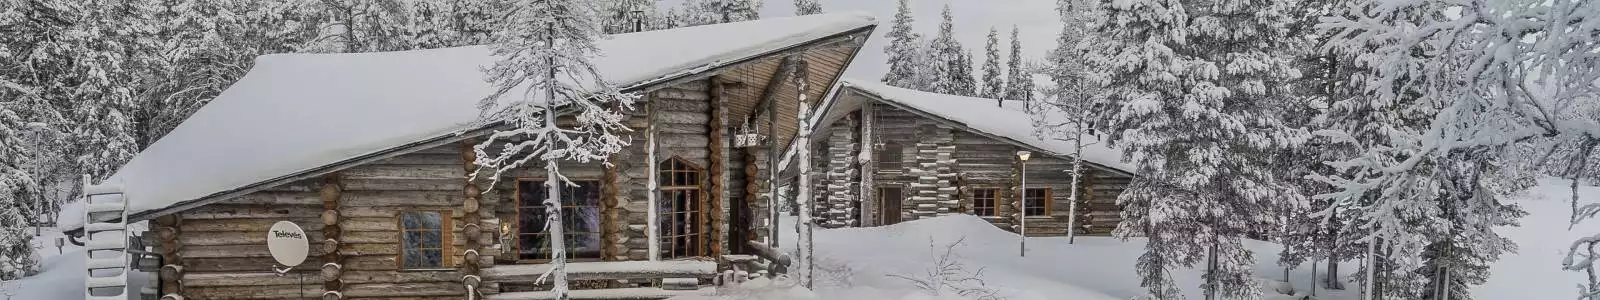 grote-chalets-lapland-header